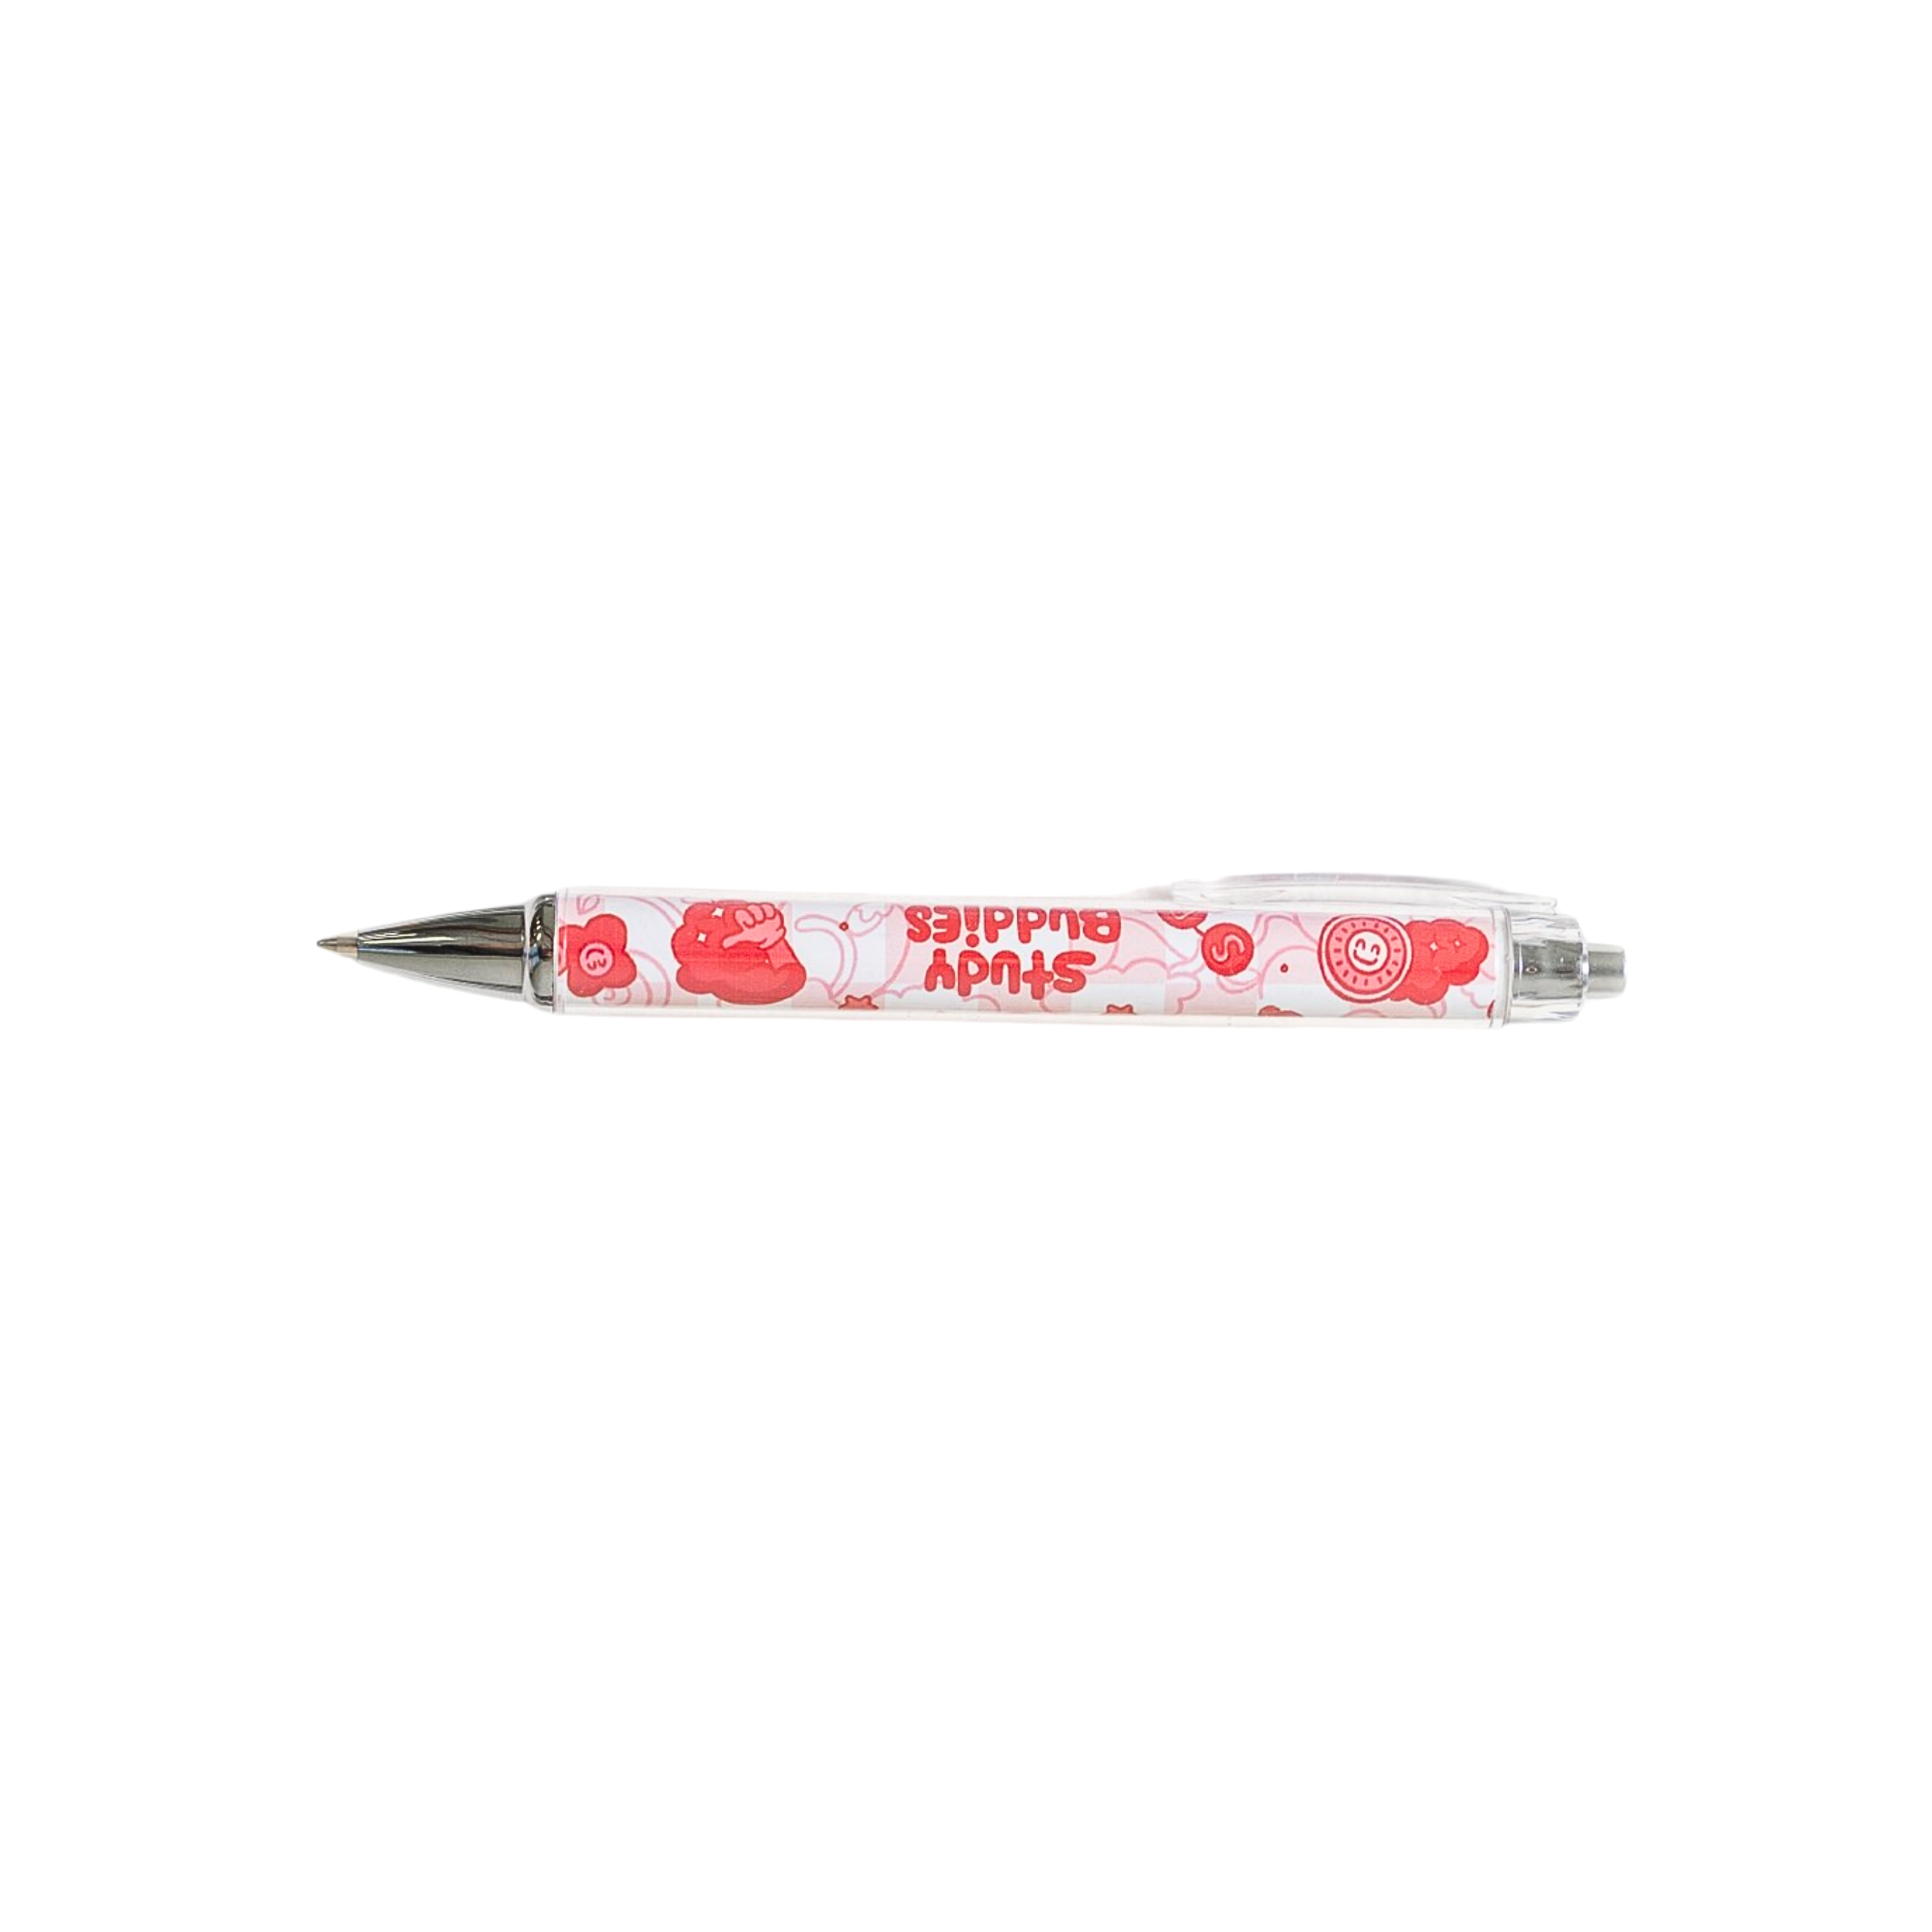 Scribble Dibble Pen (Red)

"Bring some cuteness to your academic pursuits with the Study Buddies Pen - the pawsitively perfect writing companion!